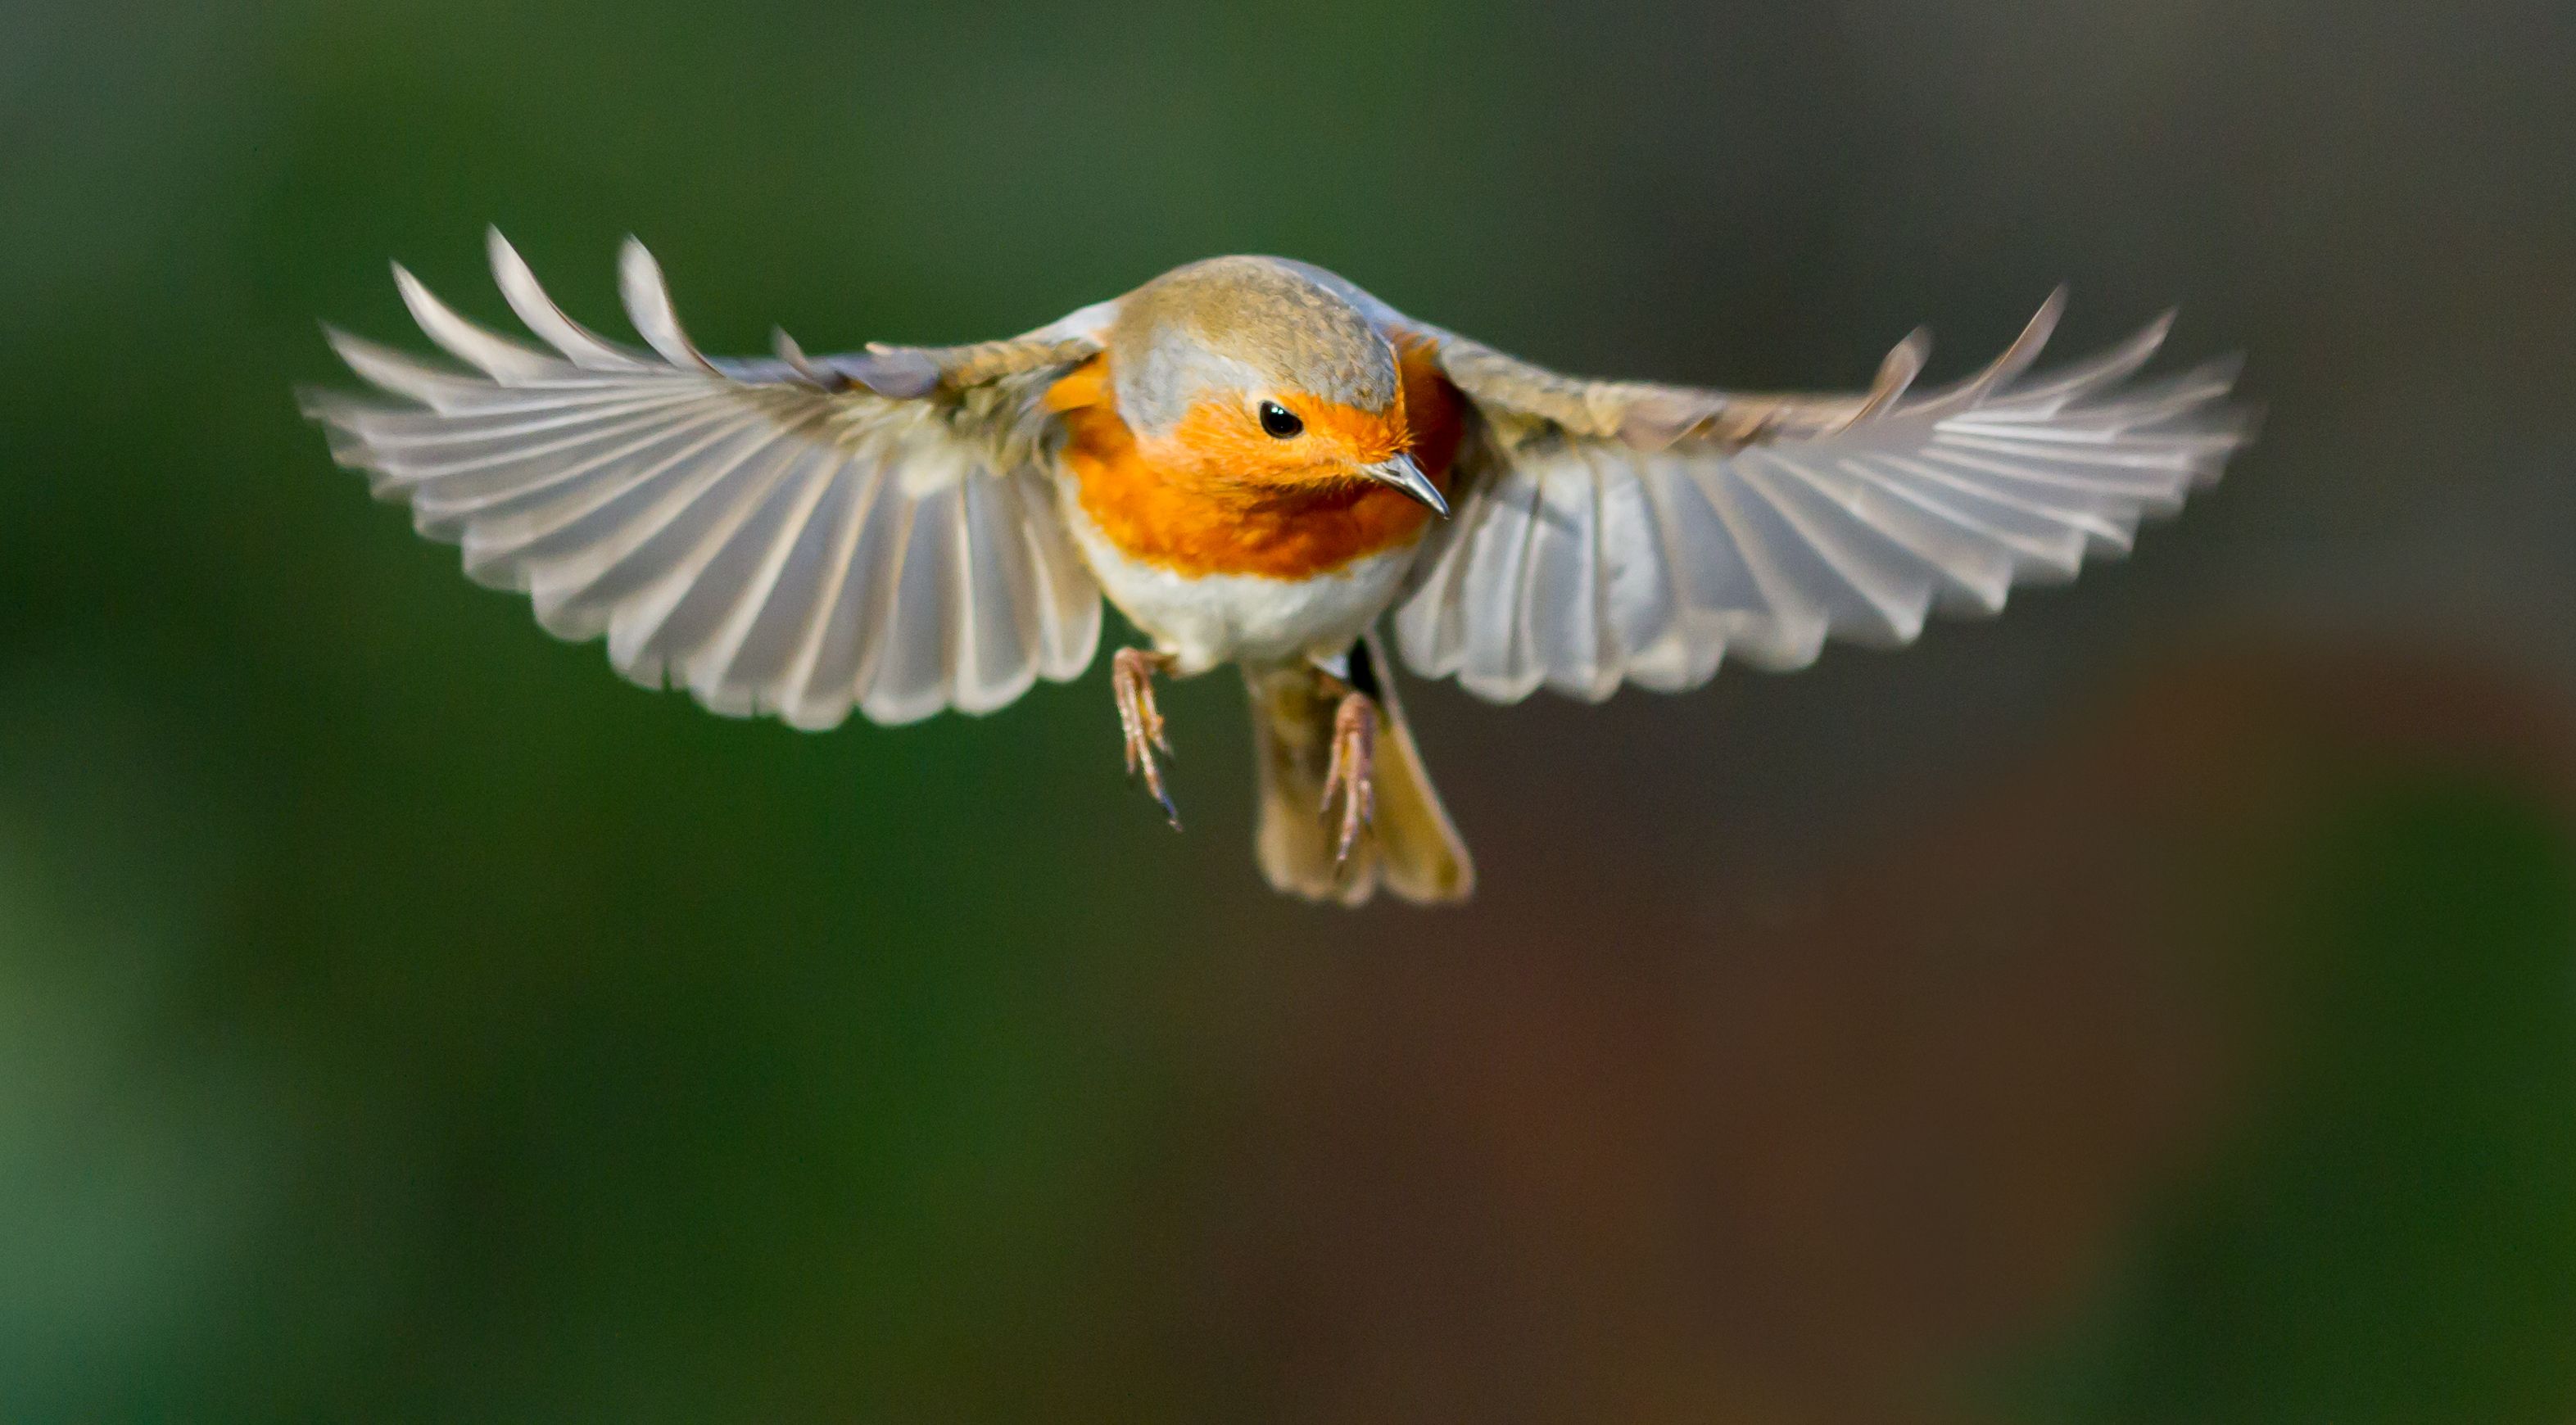 Robin migrates 140 miles over North Sea in just four hours, under